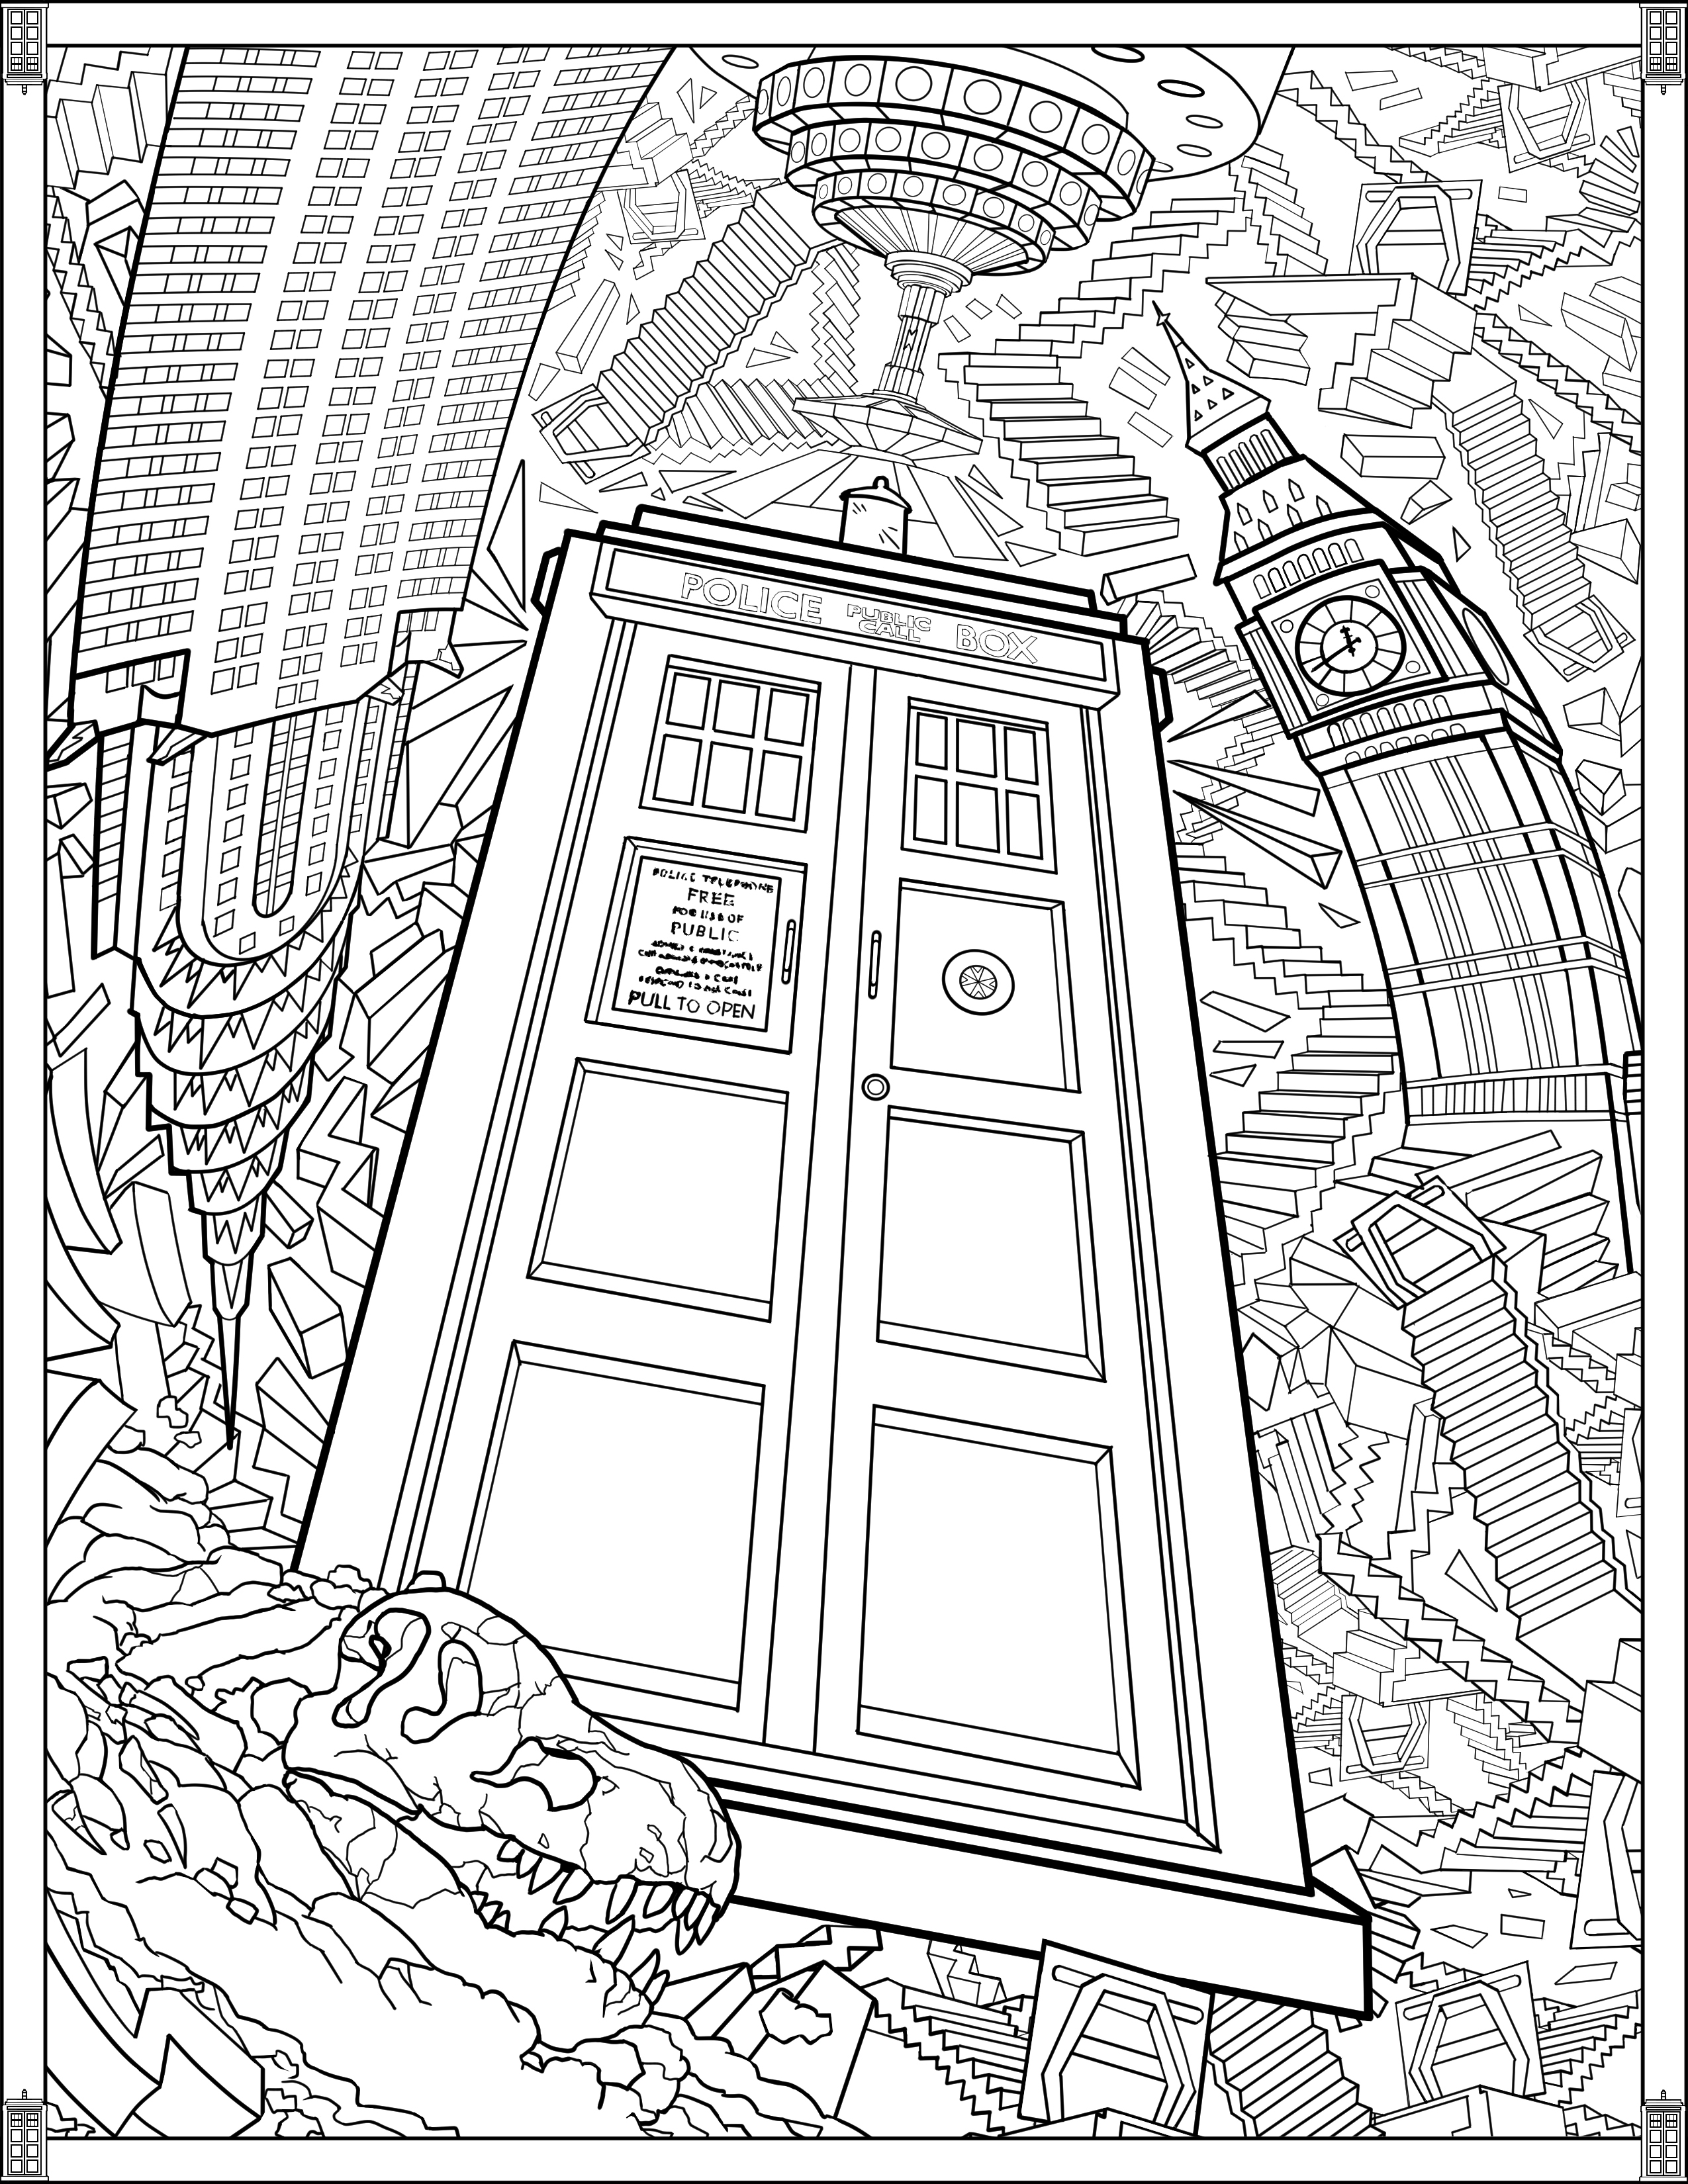 Doctor Who: Wibbly Wobbly Timey Wimey Coloring Pages [Printables] - FUN